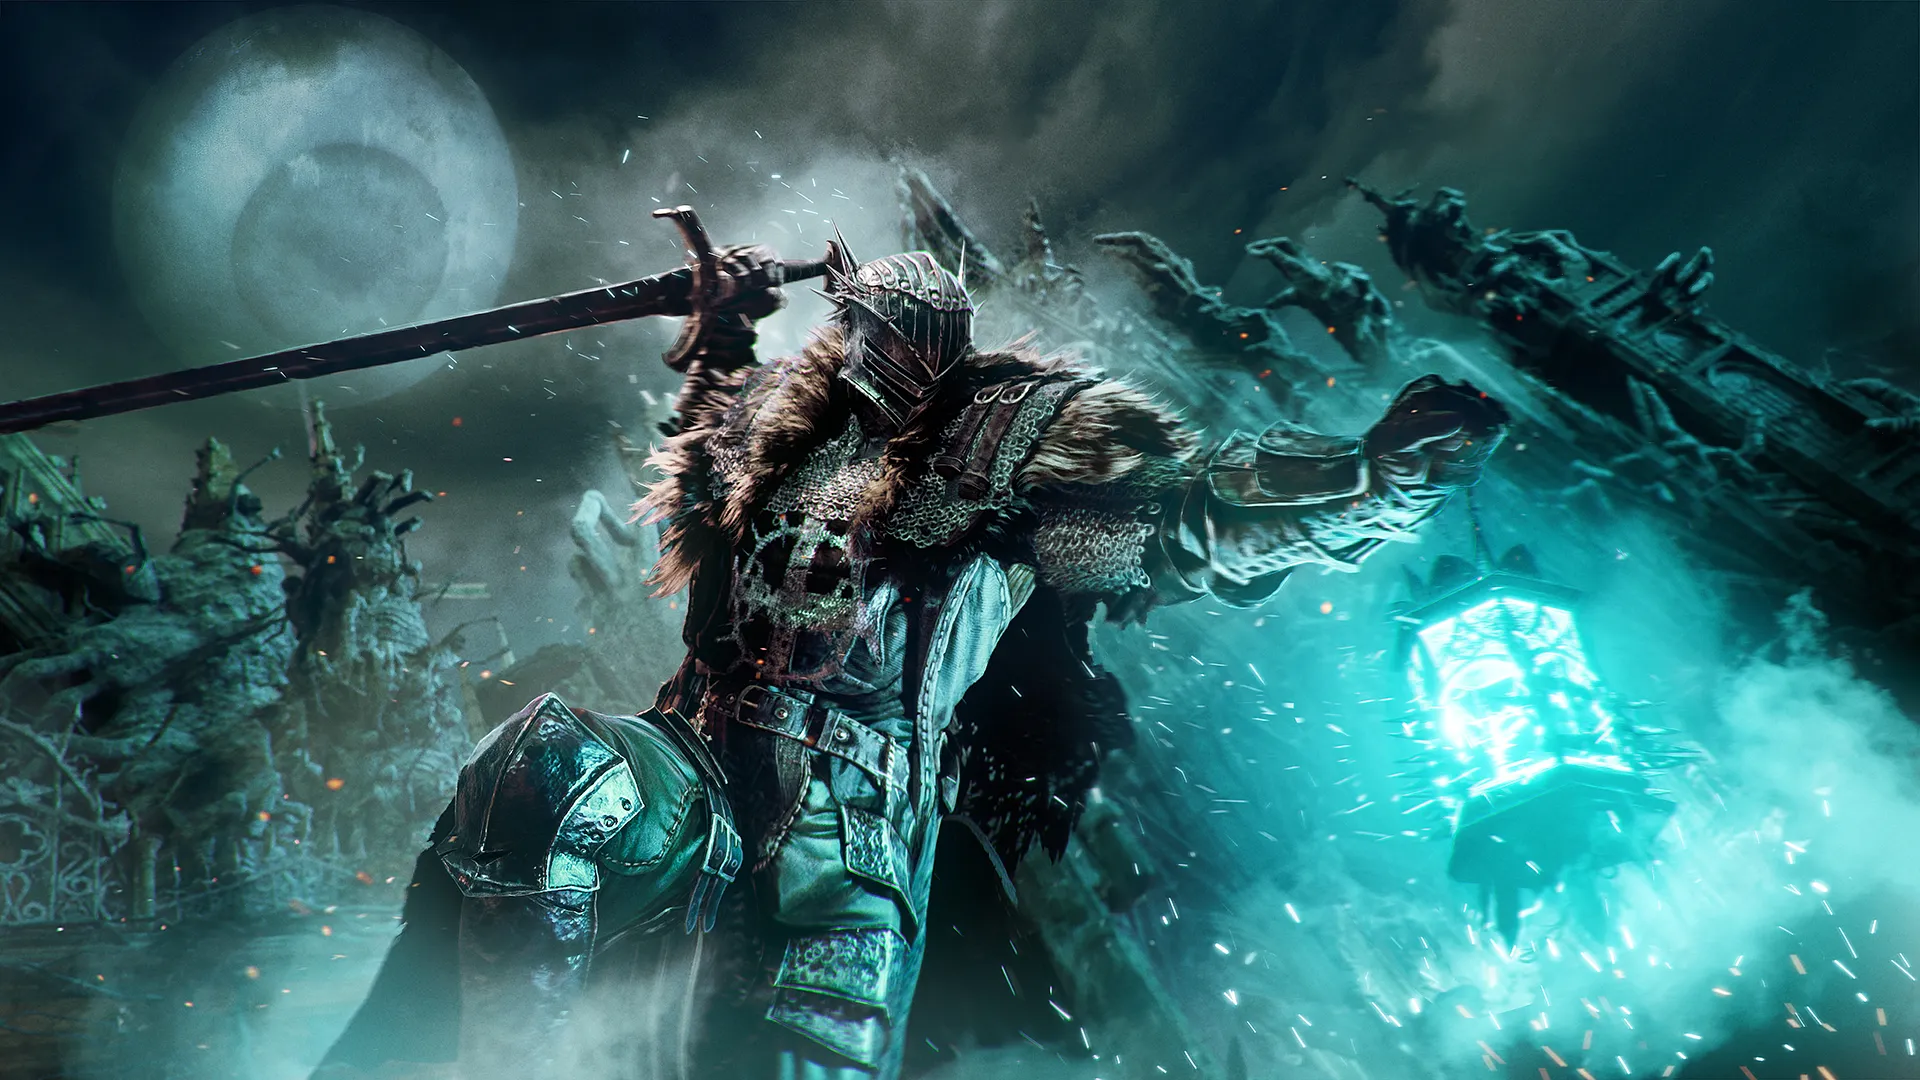 Is Lords of the Fallen Multiplayer? Does it Have a Co-Op Mode? - News